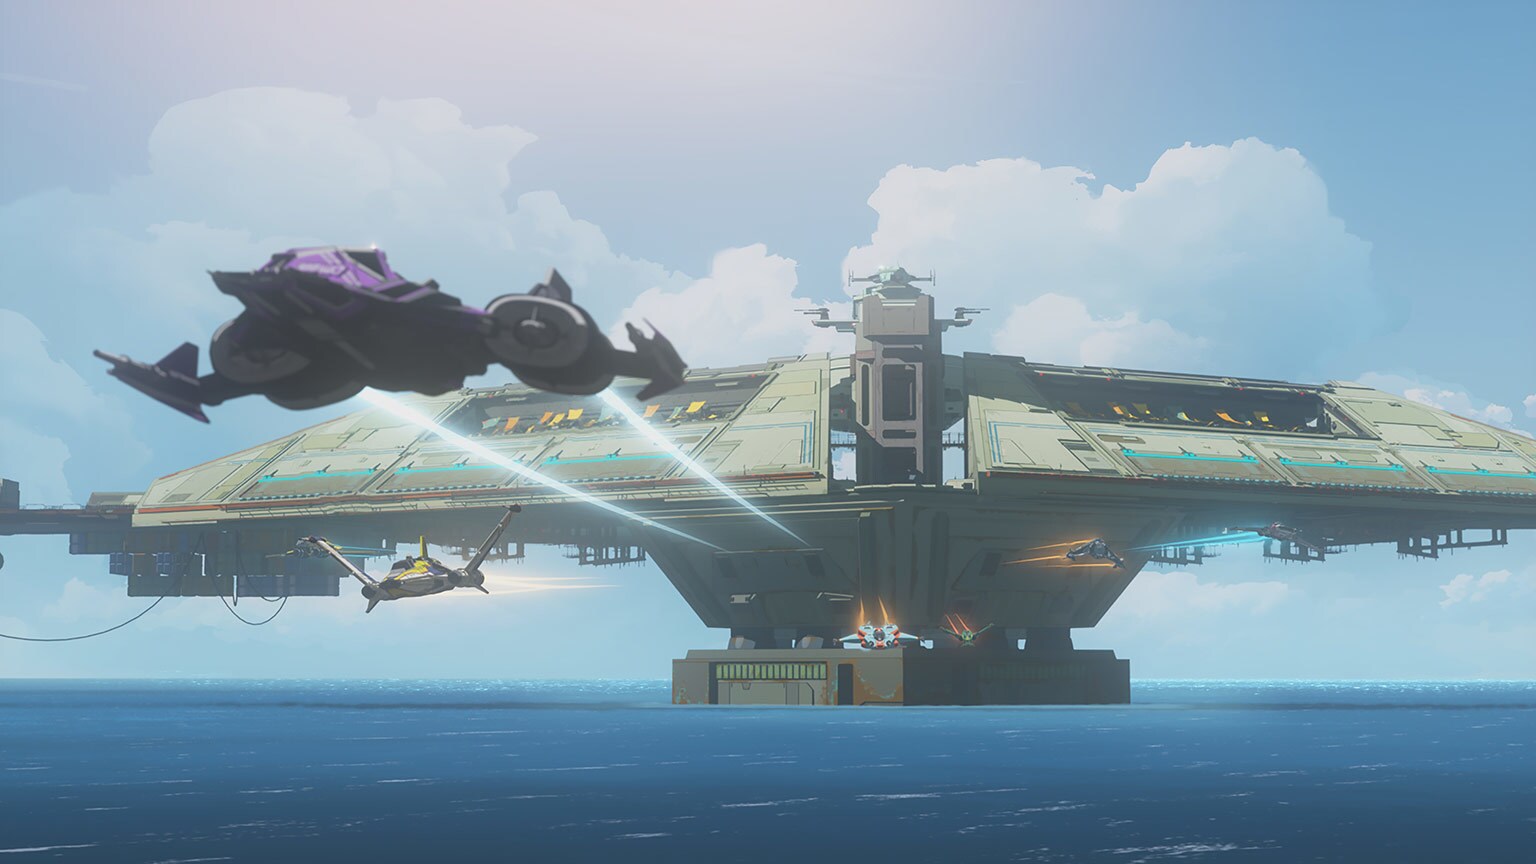 Bucket's List Extra: 11 Fun Facts from "The Platform Classic" - Star Wars Resistance